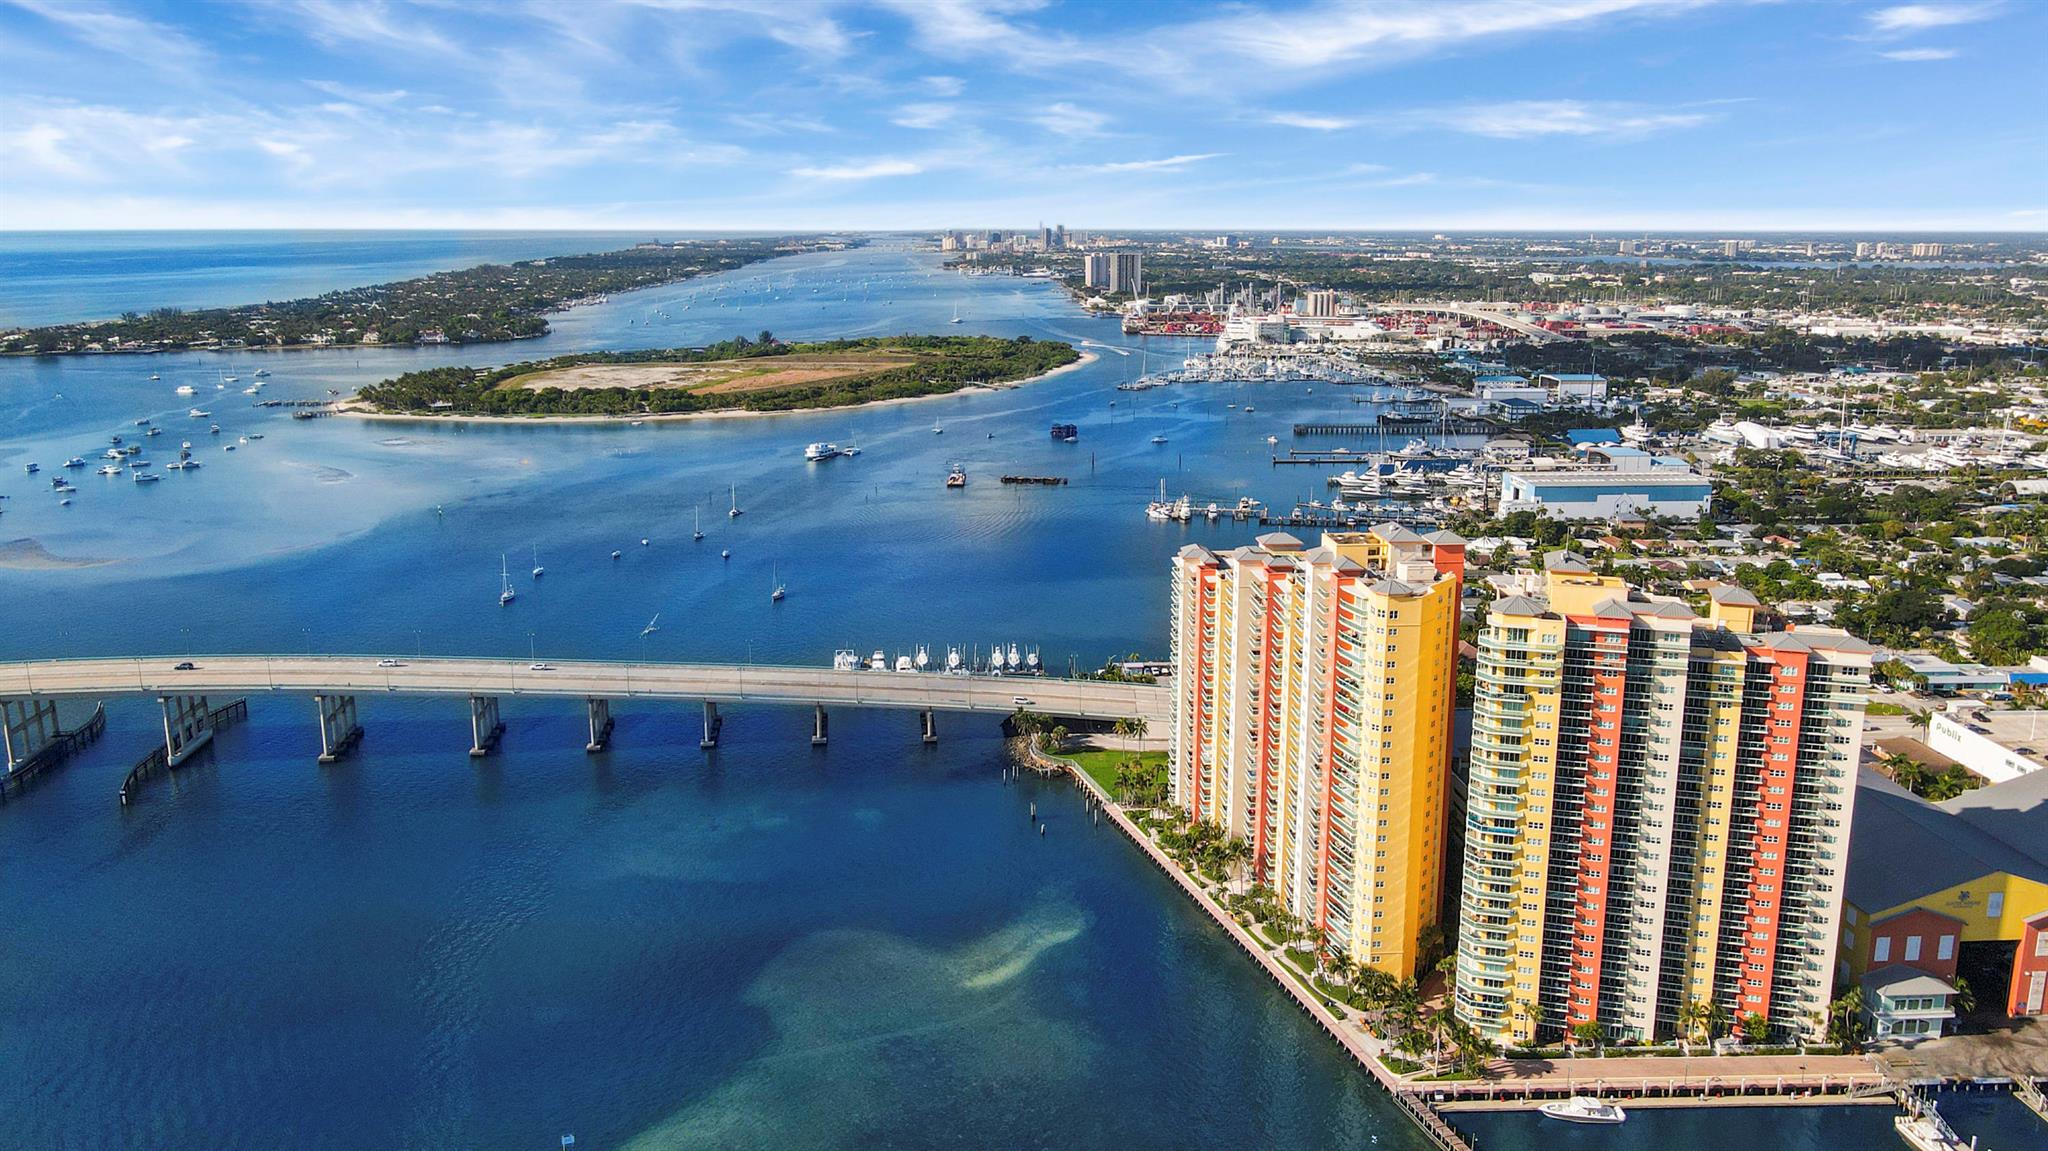 SPECTACULAR CORNER UNIT WITH DIRECT EAST OCEAN VIEWS, SOUTH INTRACOASTAL VIEWS, WEST & NORTH VIEWS, MILLION DOLLAR VIEWS - MOST SOUGHT AFTER CORNER UNIT AVAILABLE - New Roof, New Pool, New Tennis courts. Floor to Ceiling Windows facing East, South, and North views. Absolutely Spectacular views from all rooms Large Wrap-around Balcony viewing the Blue Water of the Intracoastal Waterway and Atlantic Ocean. BEACH MEMBERSHIP INCLUDED - 2 BEACH CHAIRS, ACCESS TO POOL ON BEACH, RESTAURANT DIRECTLY ON BEACH SERVES LUNCH AND DINNER AT BEACH OR POOL. OR CHOOSE TO DINE IN ON THE RESTAURANT ON THE BEACH. Three bedrooms en suite, Open Floor Plan in the Living Area. Contemporary Style with custom details throughout that include White Porcelain Tile Flooring, Quartz Counter Tops